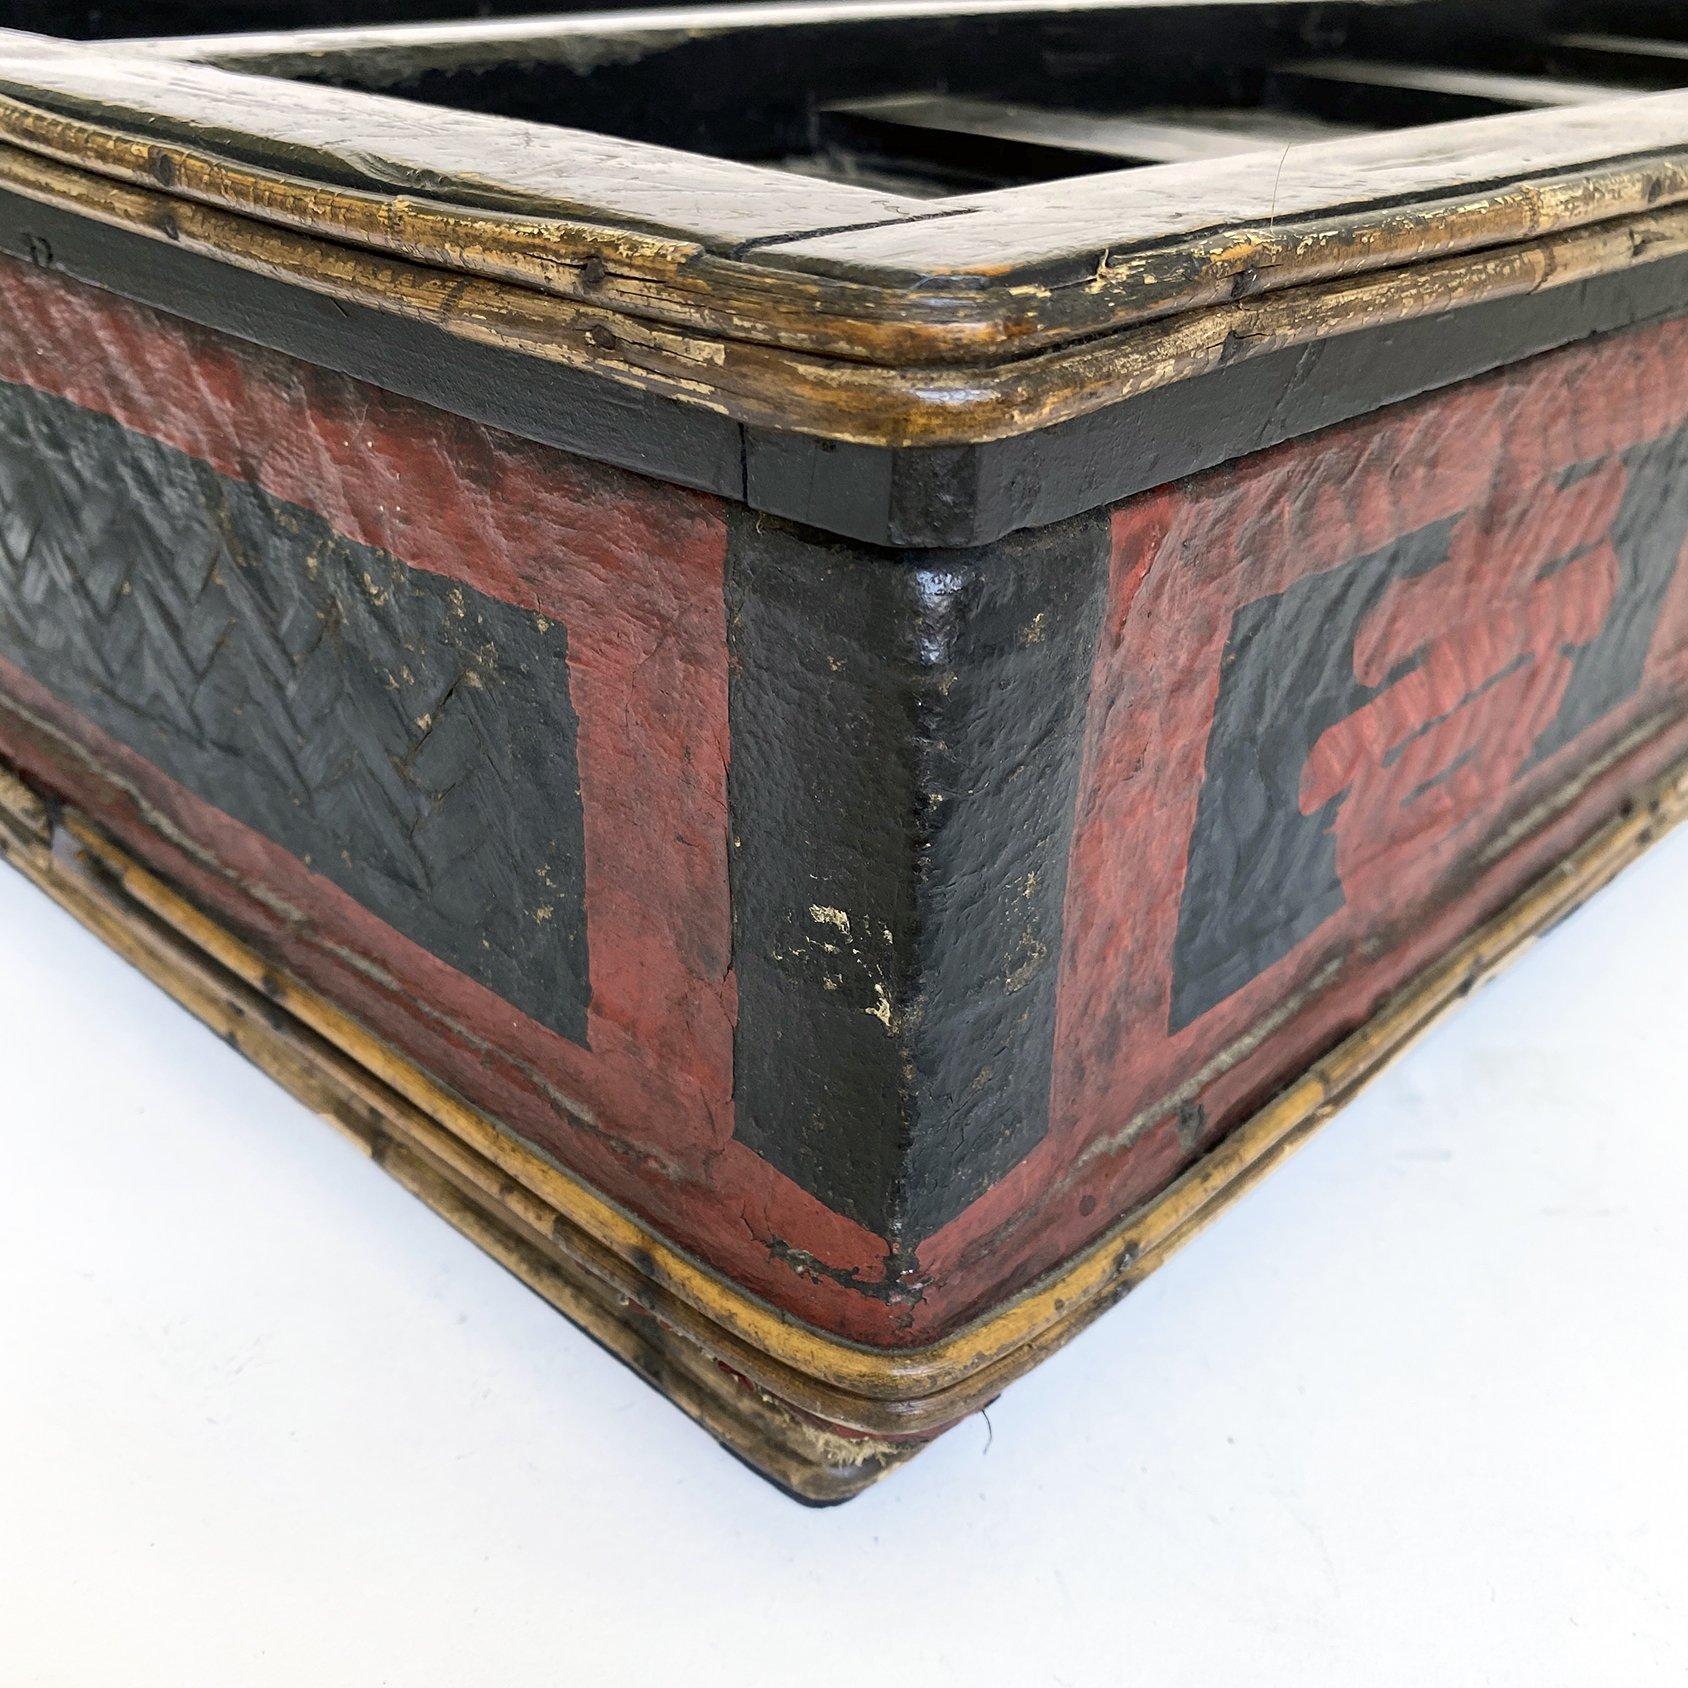 Japanese Kimono storage box, constructed of wood and bamboo, painted black with family crest painted in red on the sides. The top has wood slats, which convey strength and beauty. Both top and bottom is lined inside with paper to protect the